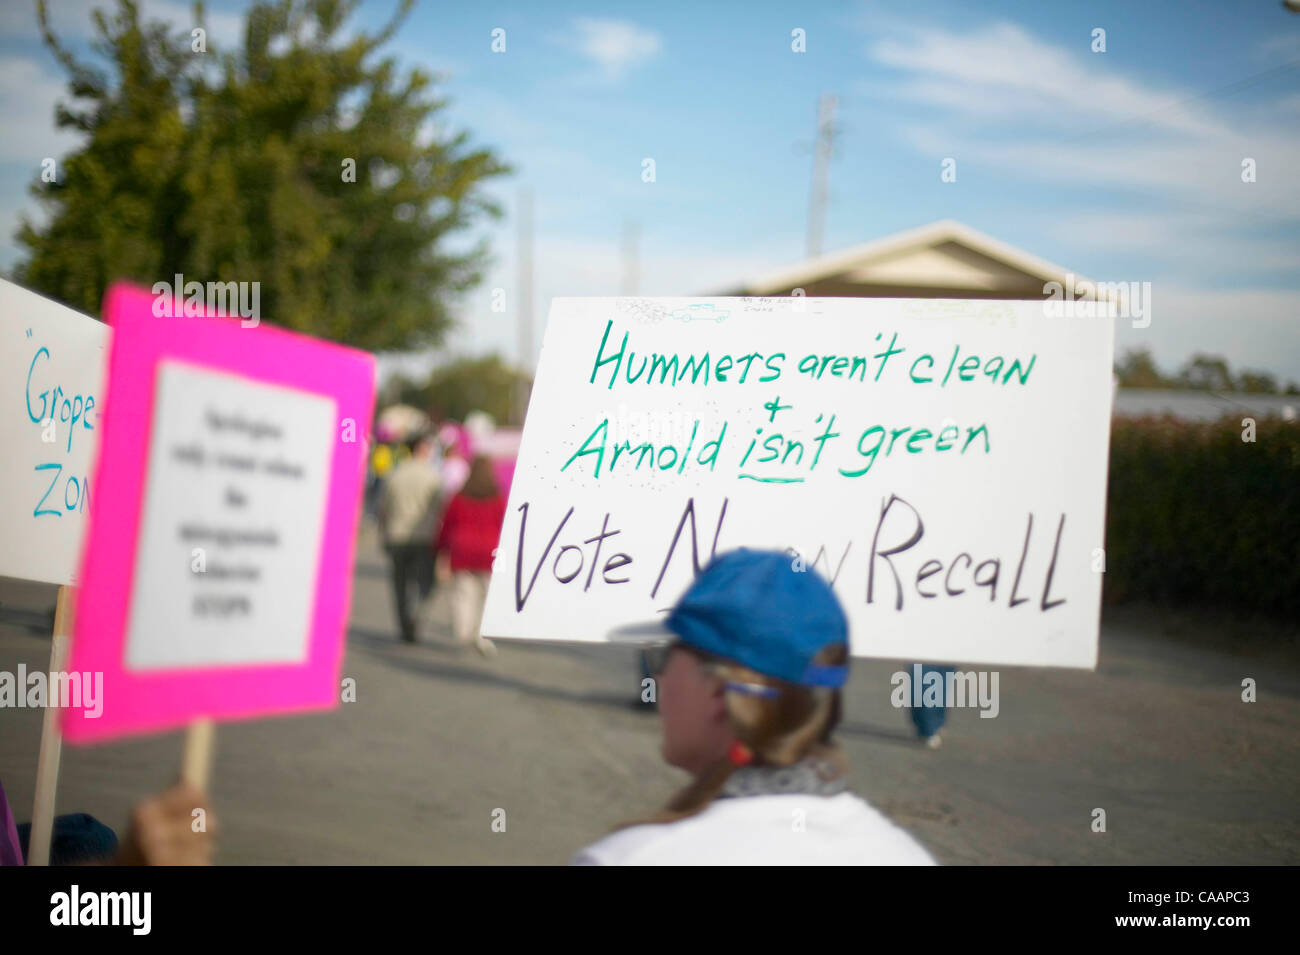 Jan 12, 2004; Oakland, CA, USA; At Arnold Schwarznenegger's Rally for Governor, picketers protest holding signes that read Hummers aren't clean and Arnold isn't green, Vote Now Recall. Stock Photo